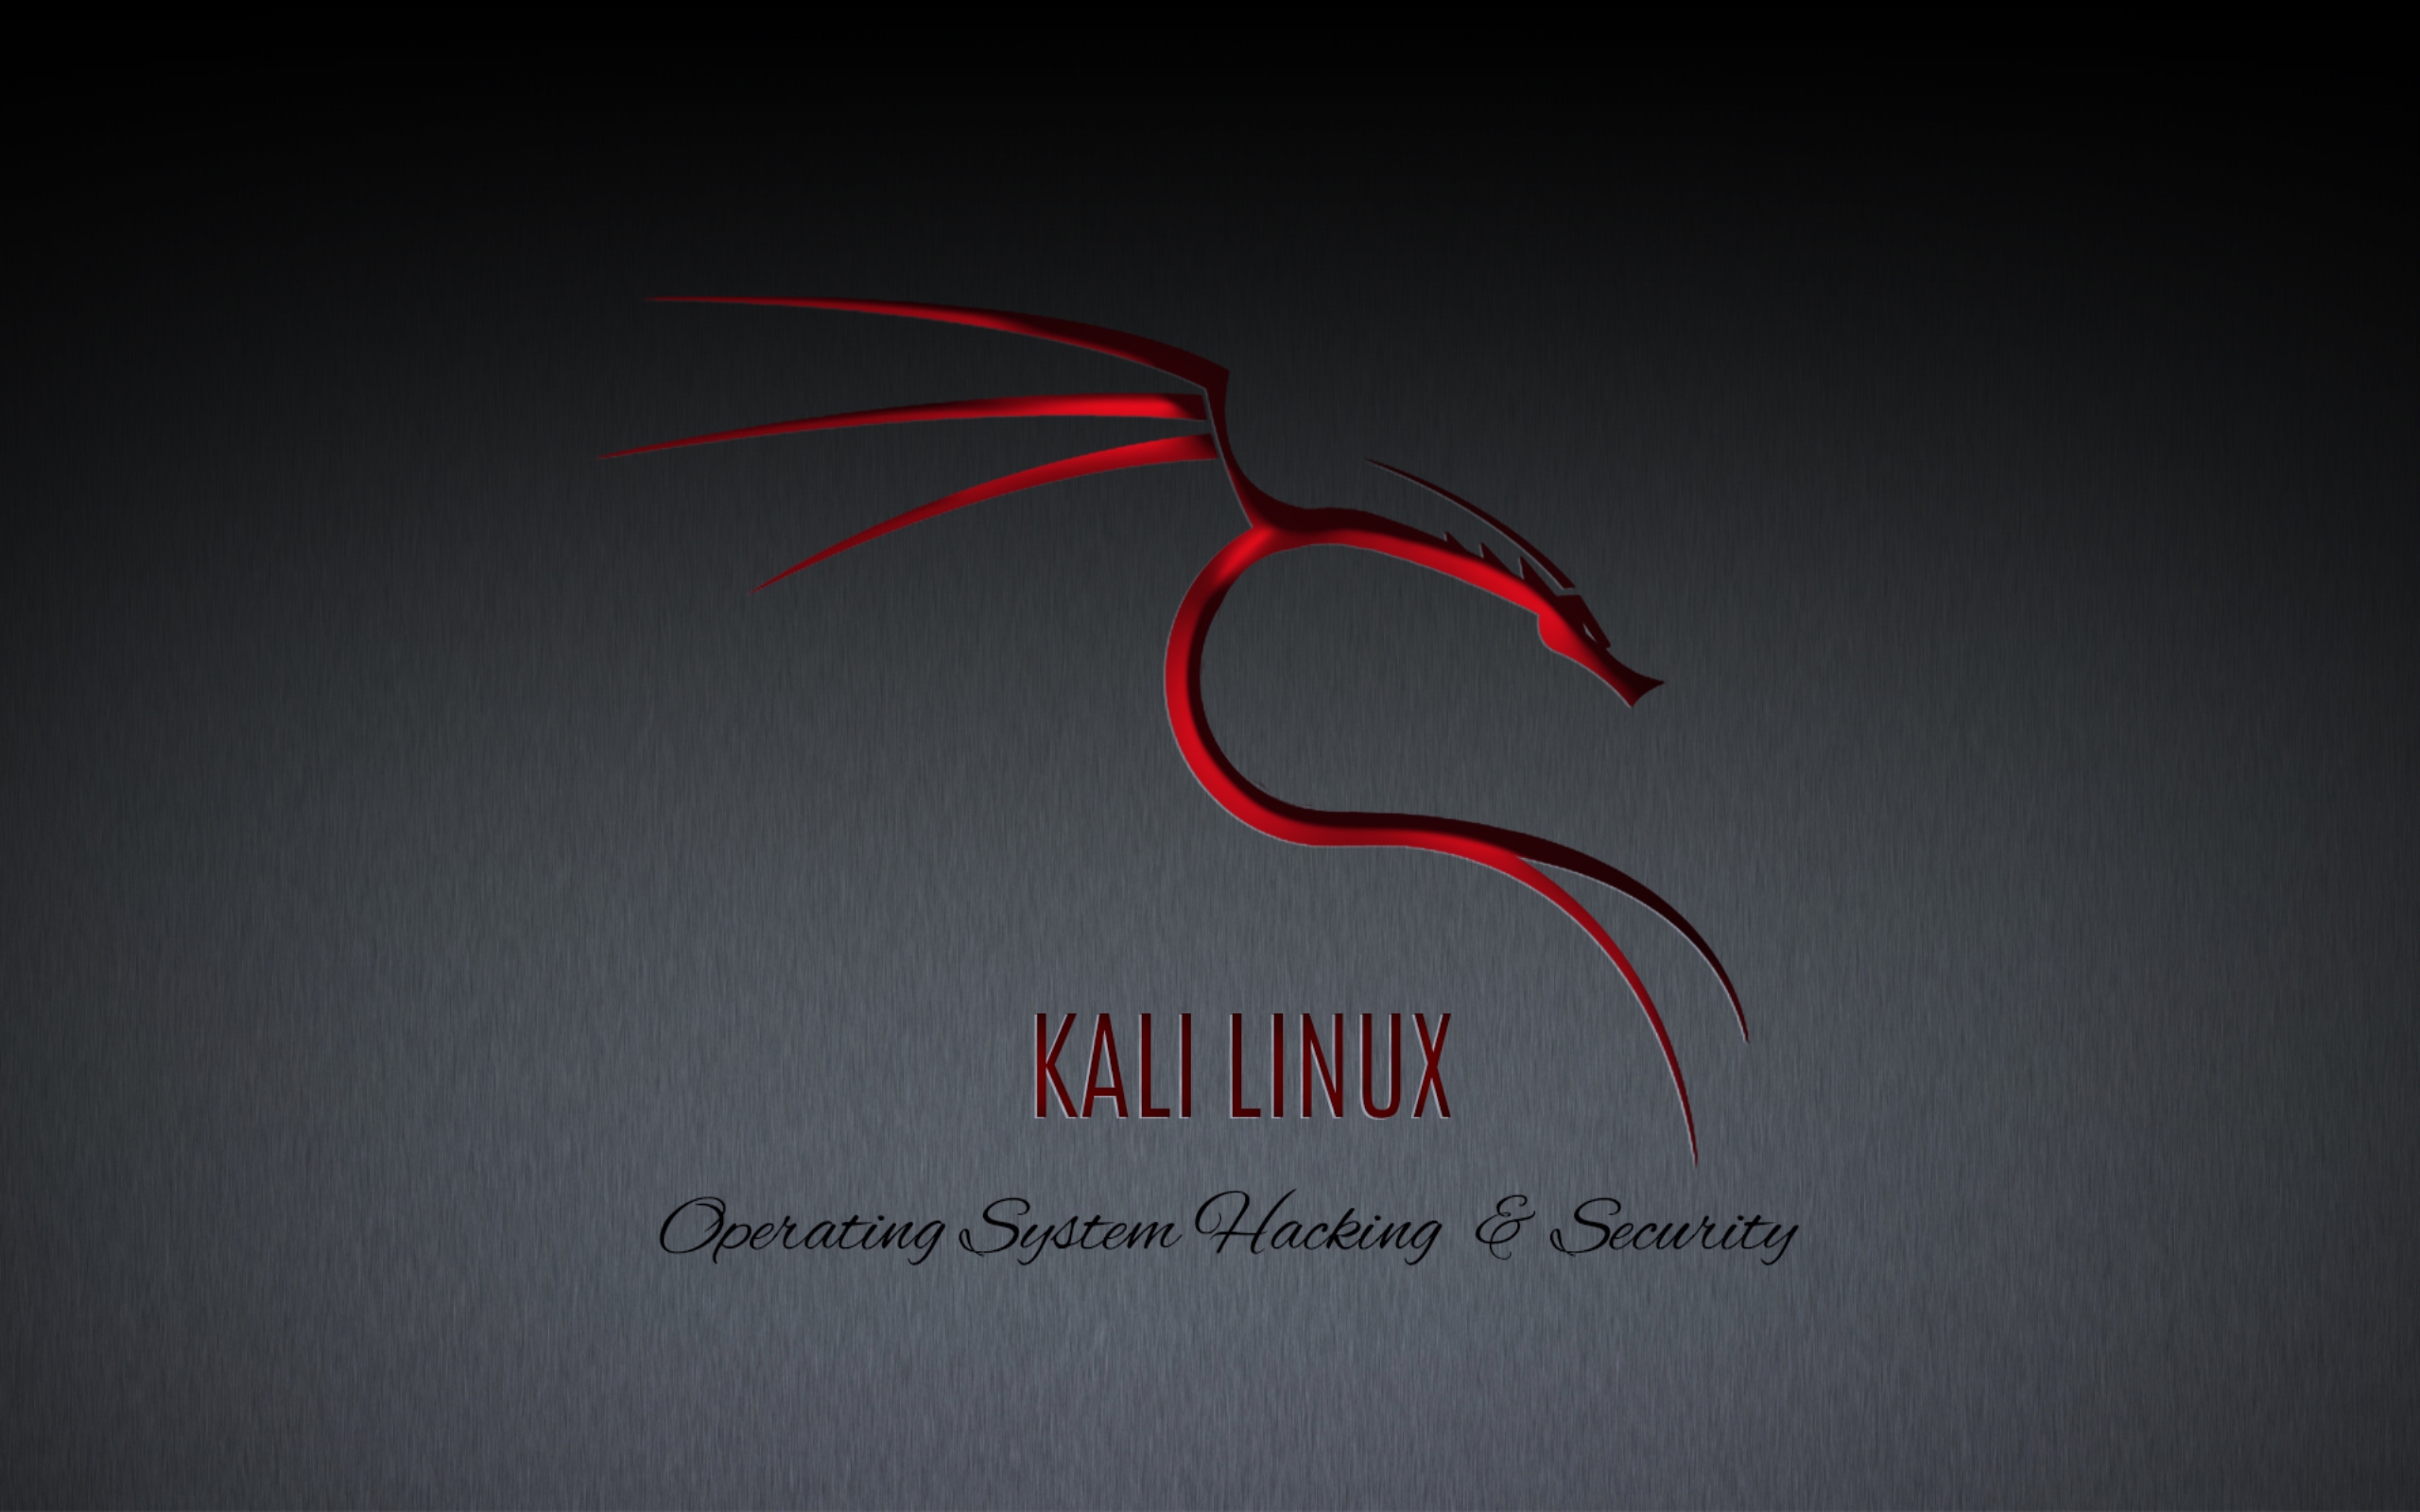 offline english dictionary for kali linux